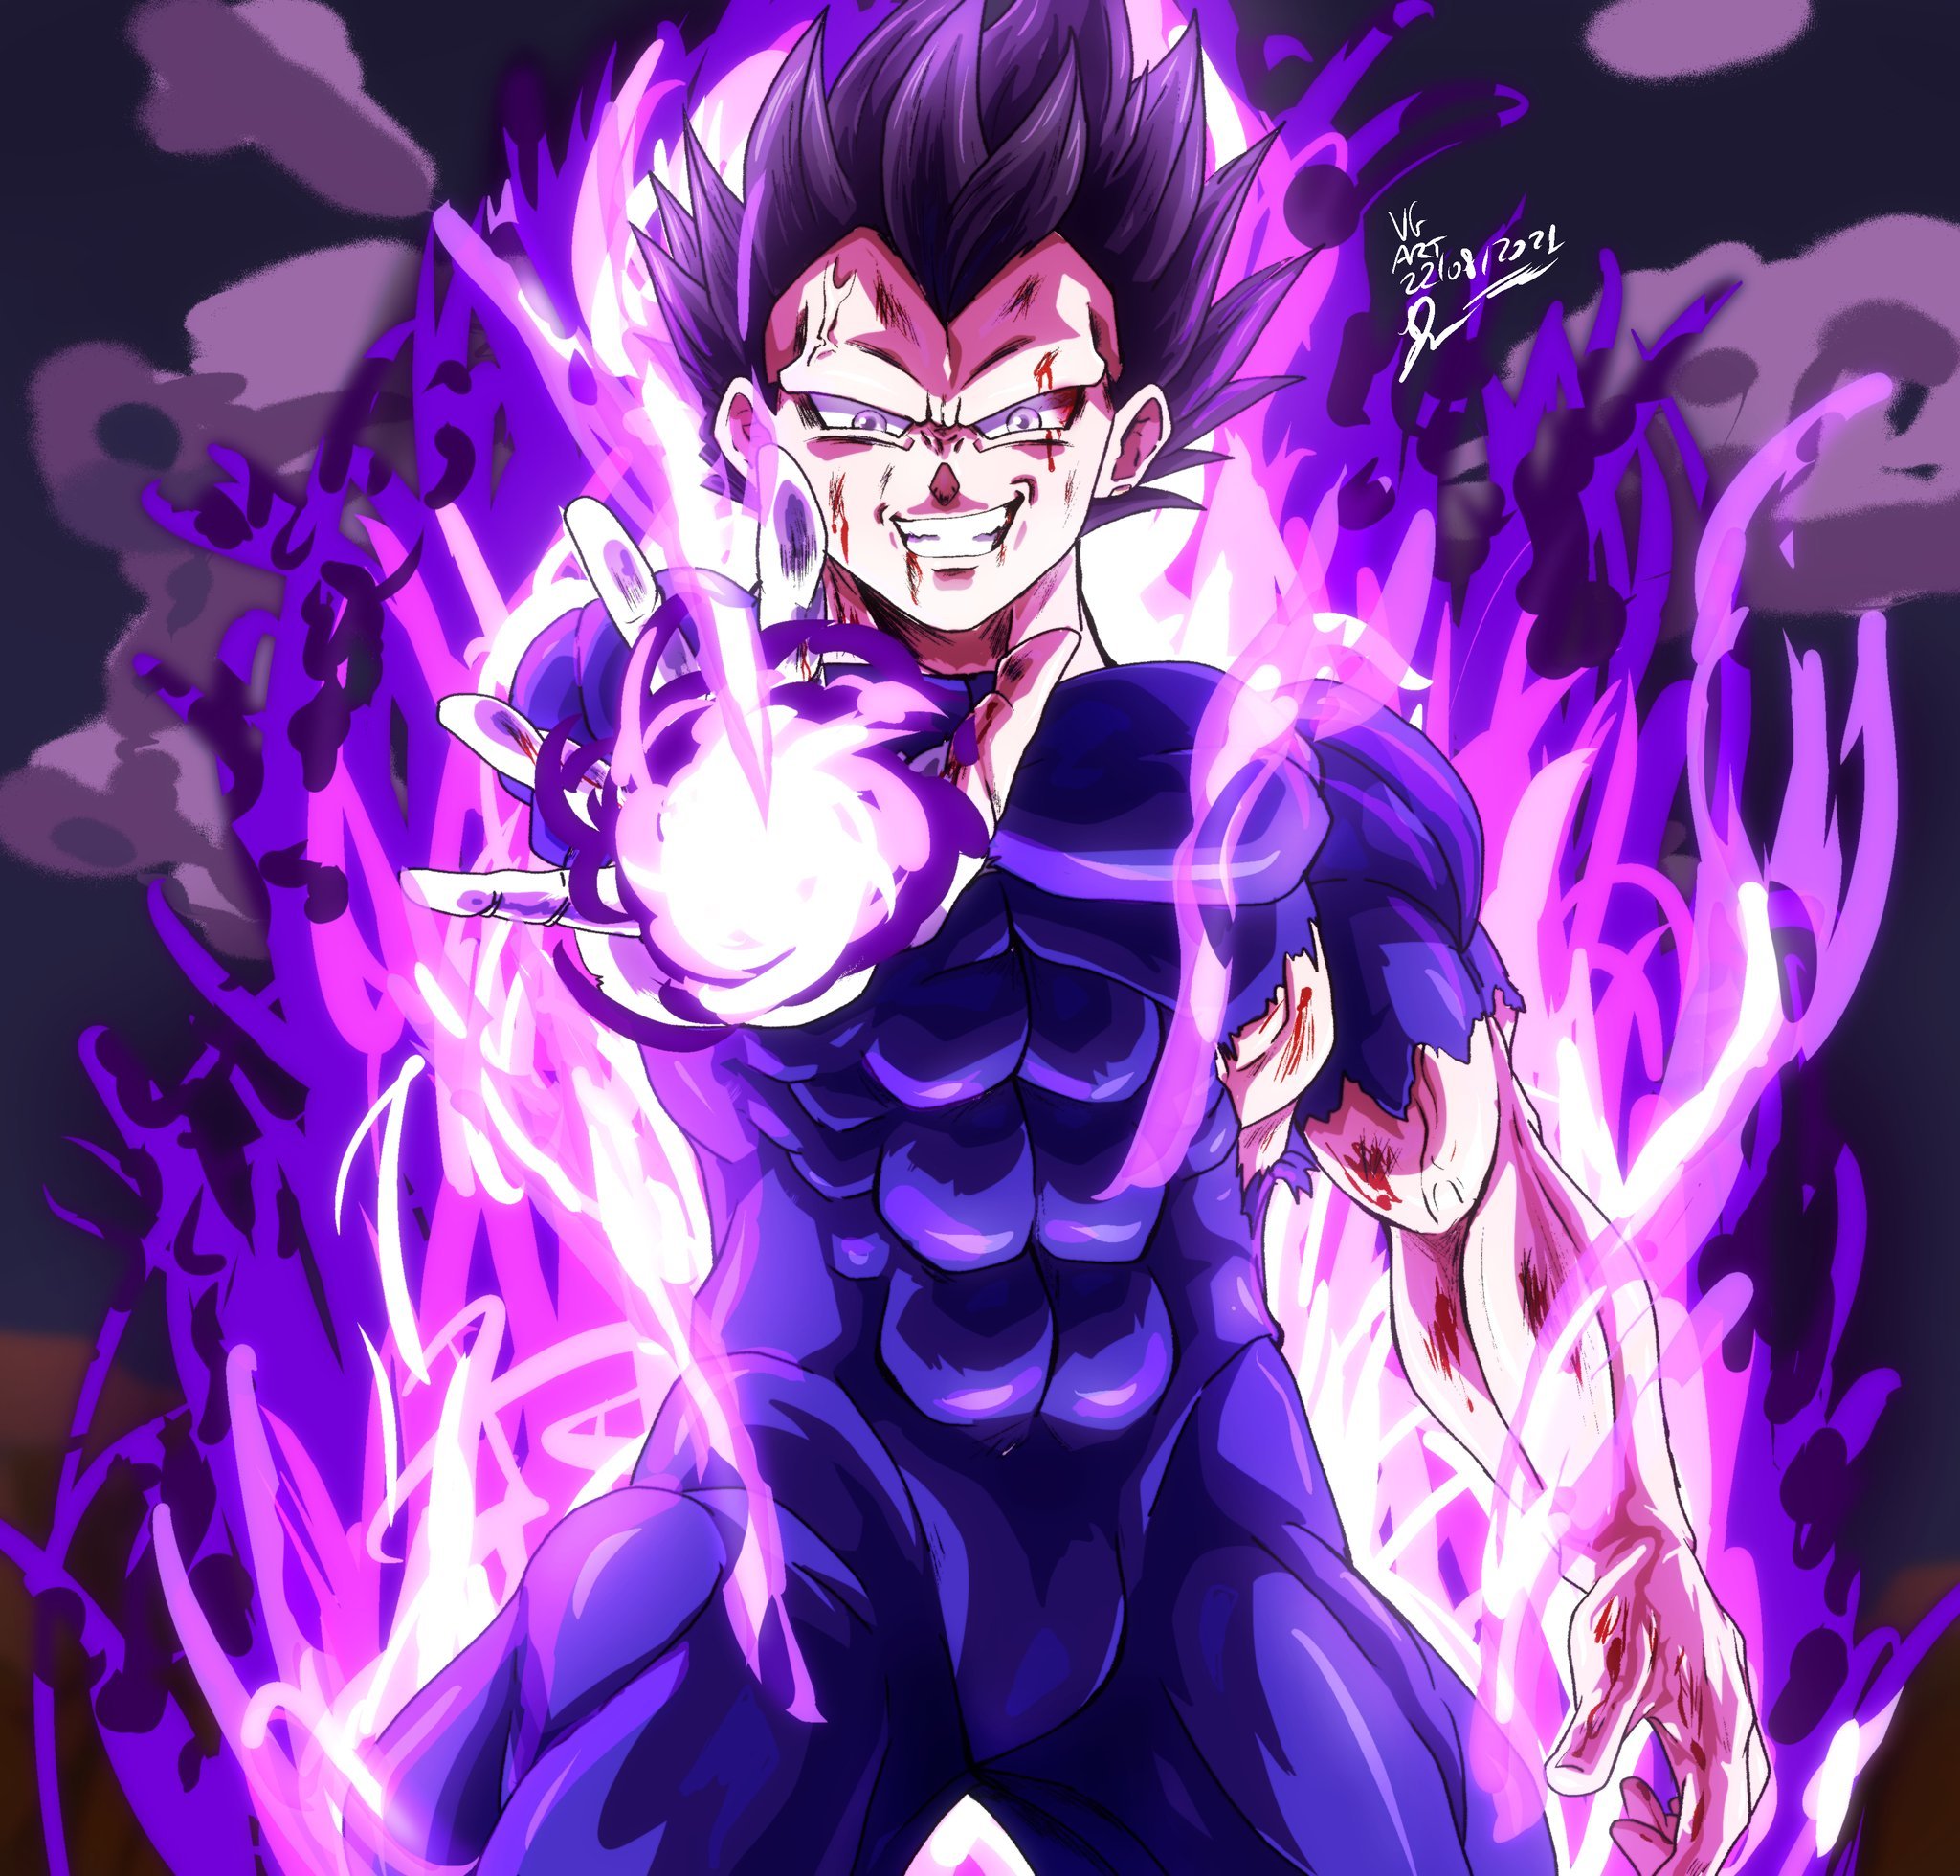 Vincent graphic art (commissions open, no NSFW) Ultra ego for #sundayfanart! Follow and retweet to help me grow! For info and commissions direct me #Vegeta #vegetaultraego #DragonBallSuper75 #DragonBallSuper #DragonBallSupermanga #